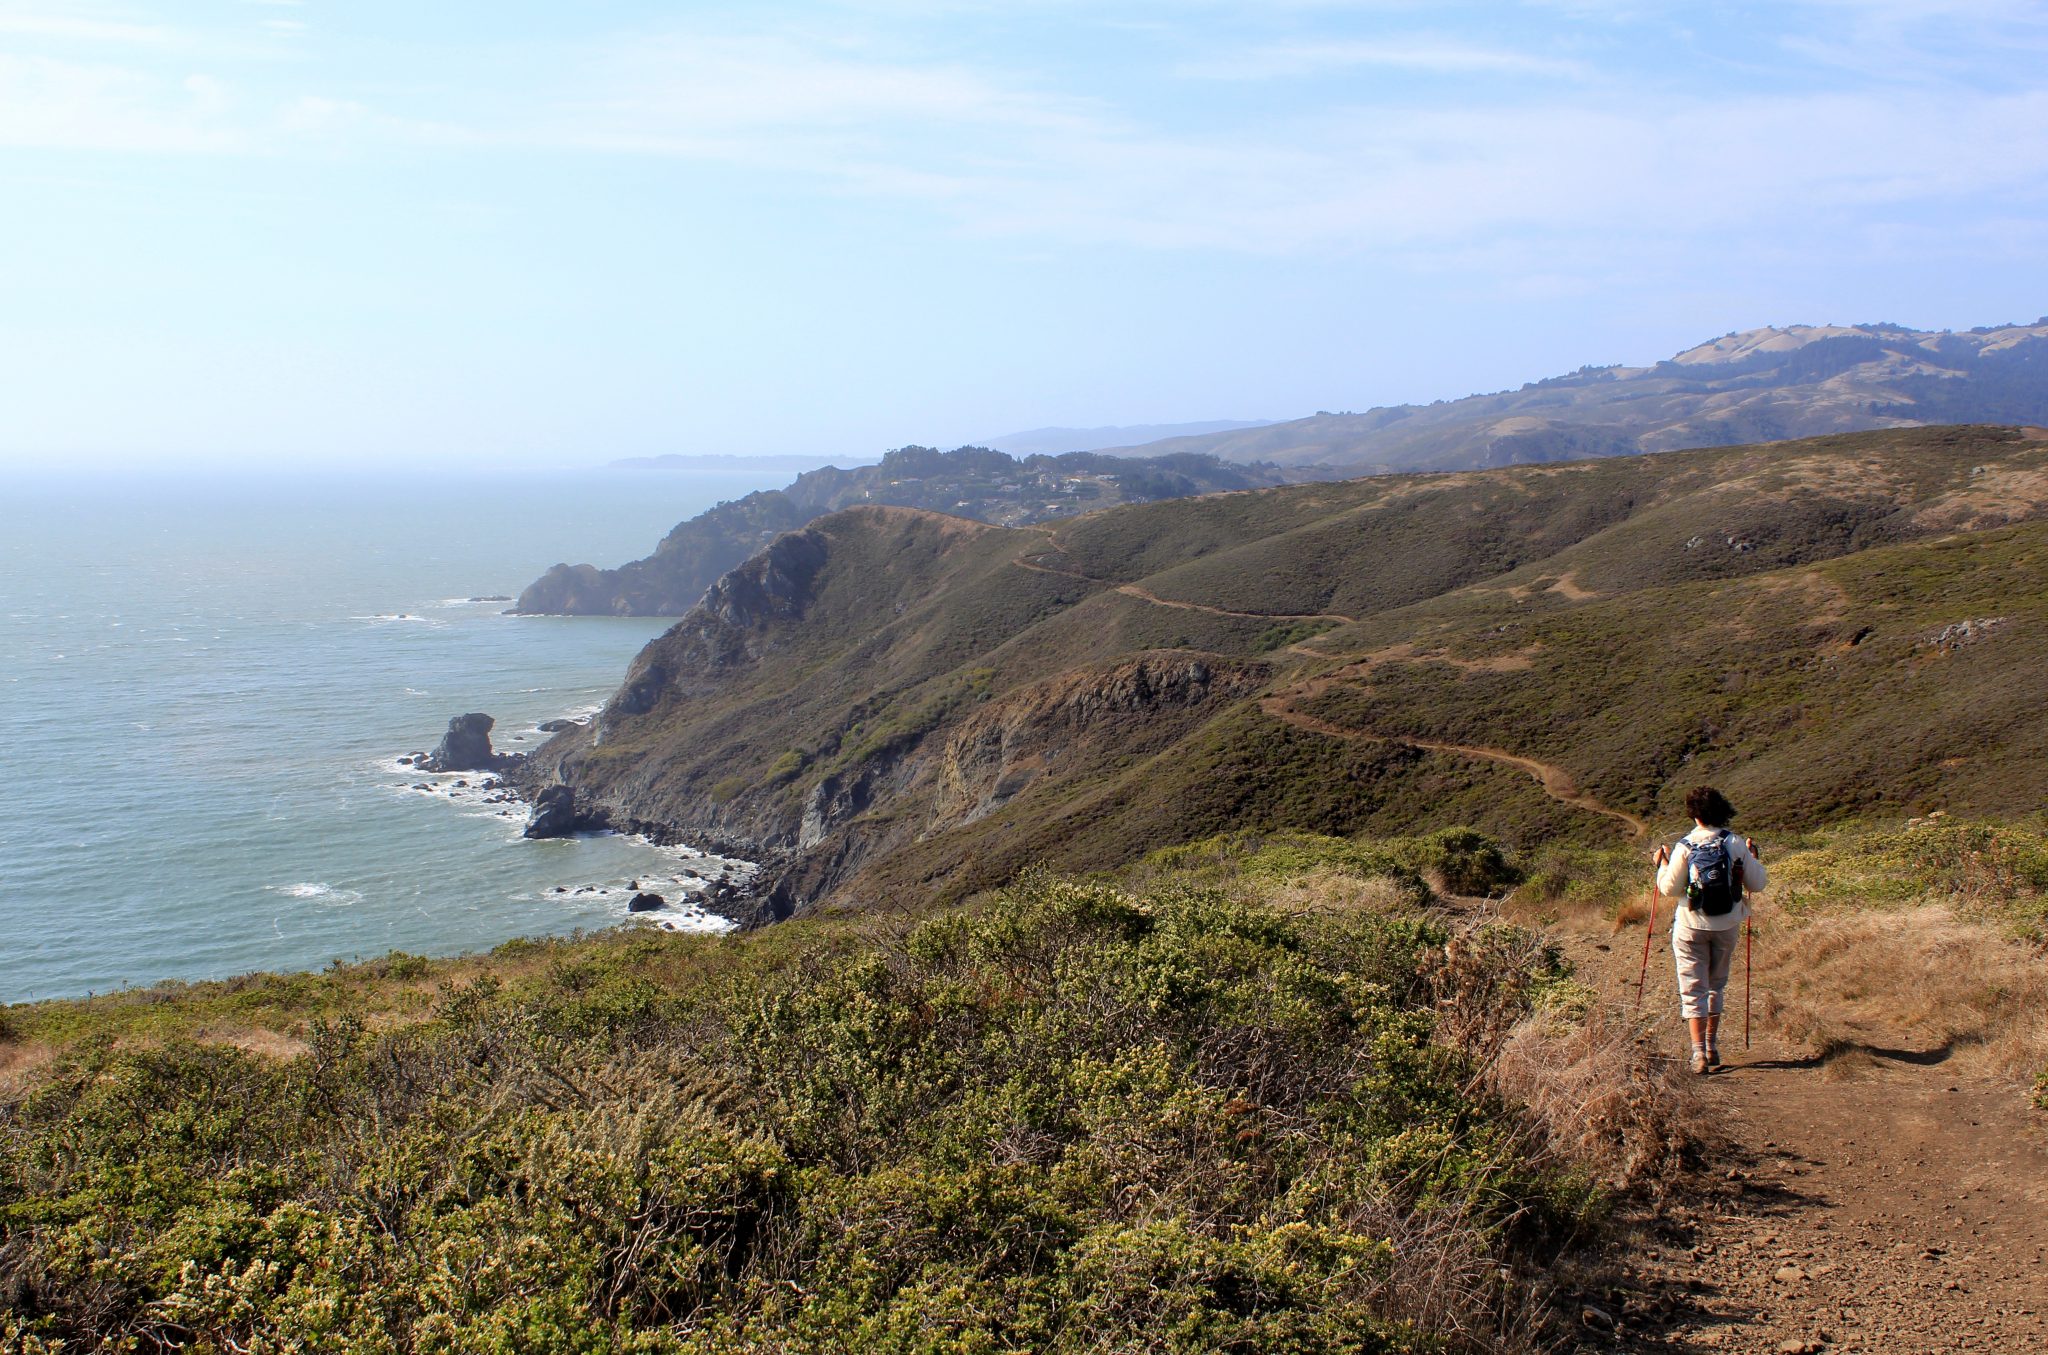 A runner on the coastal trail between Sausalito and Muir beach